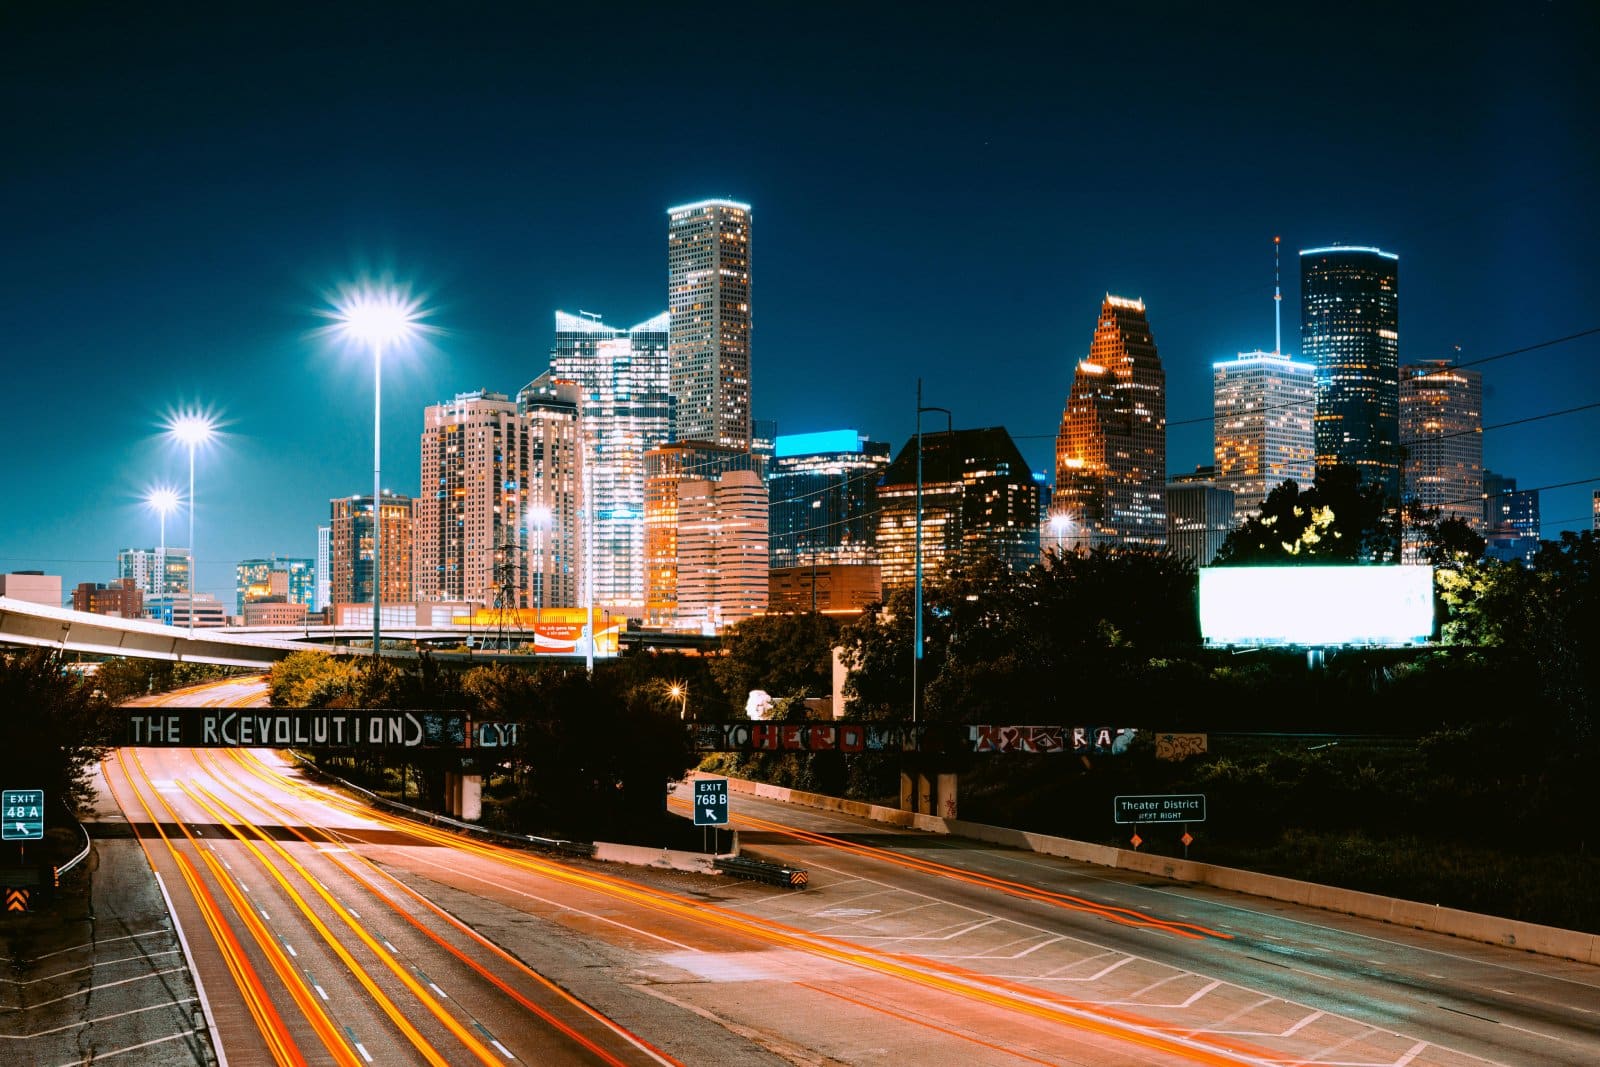 <p class="wp-caption-text">Image Credit: Pexels / Adrian Newell</p>  <p>Houston’s Space Center and diverse culinary scene make it a must-visit. Yet, the city has areas with significant crime rates, including theft and assault. Tourists are encouraged to explore its attractions while being vigilant about their personal safety.</p>